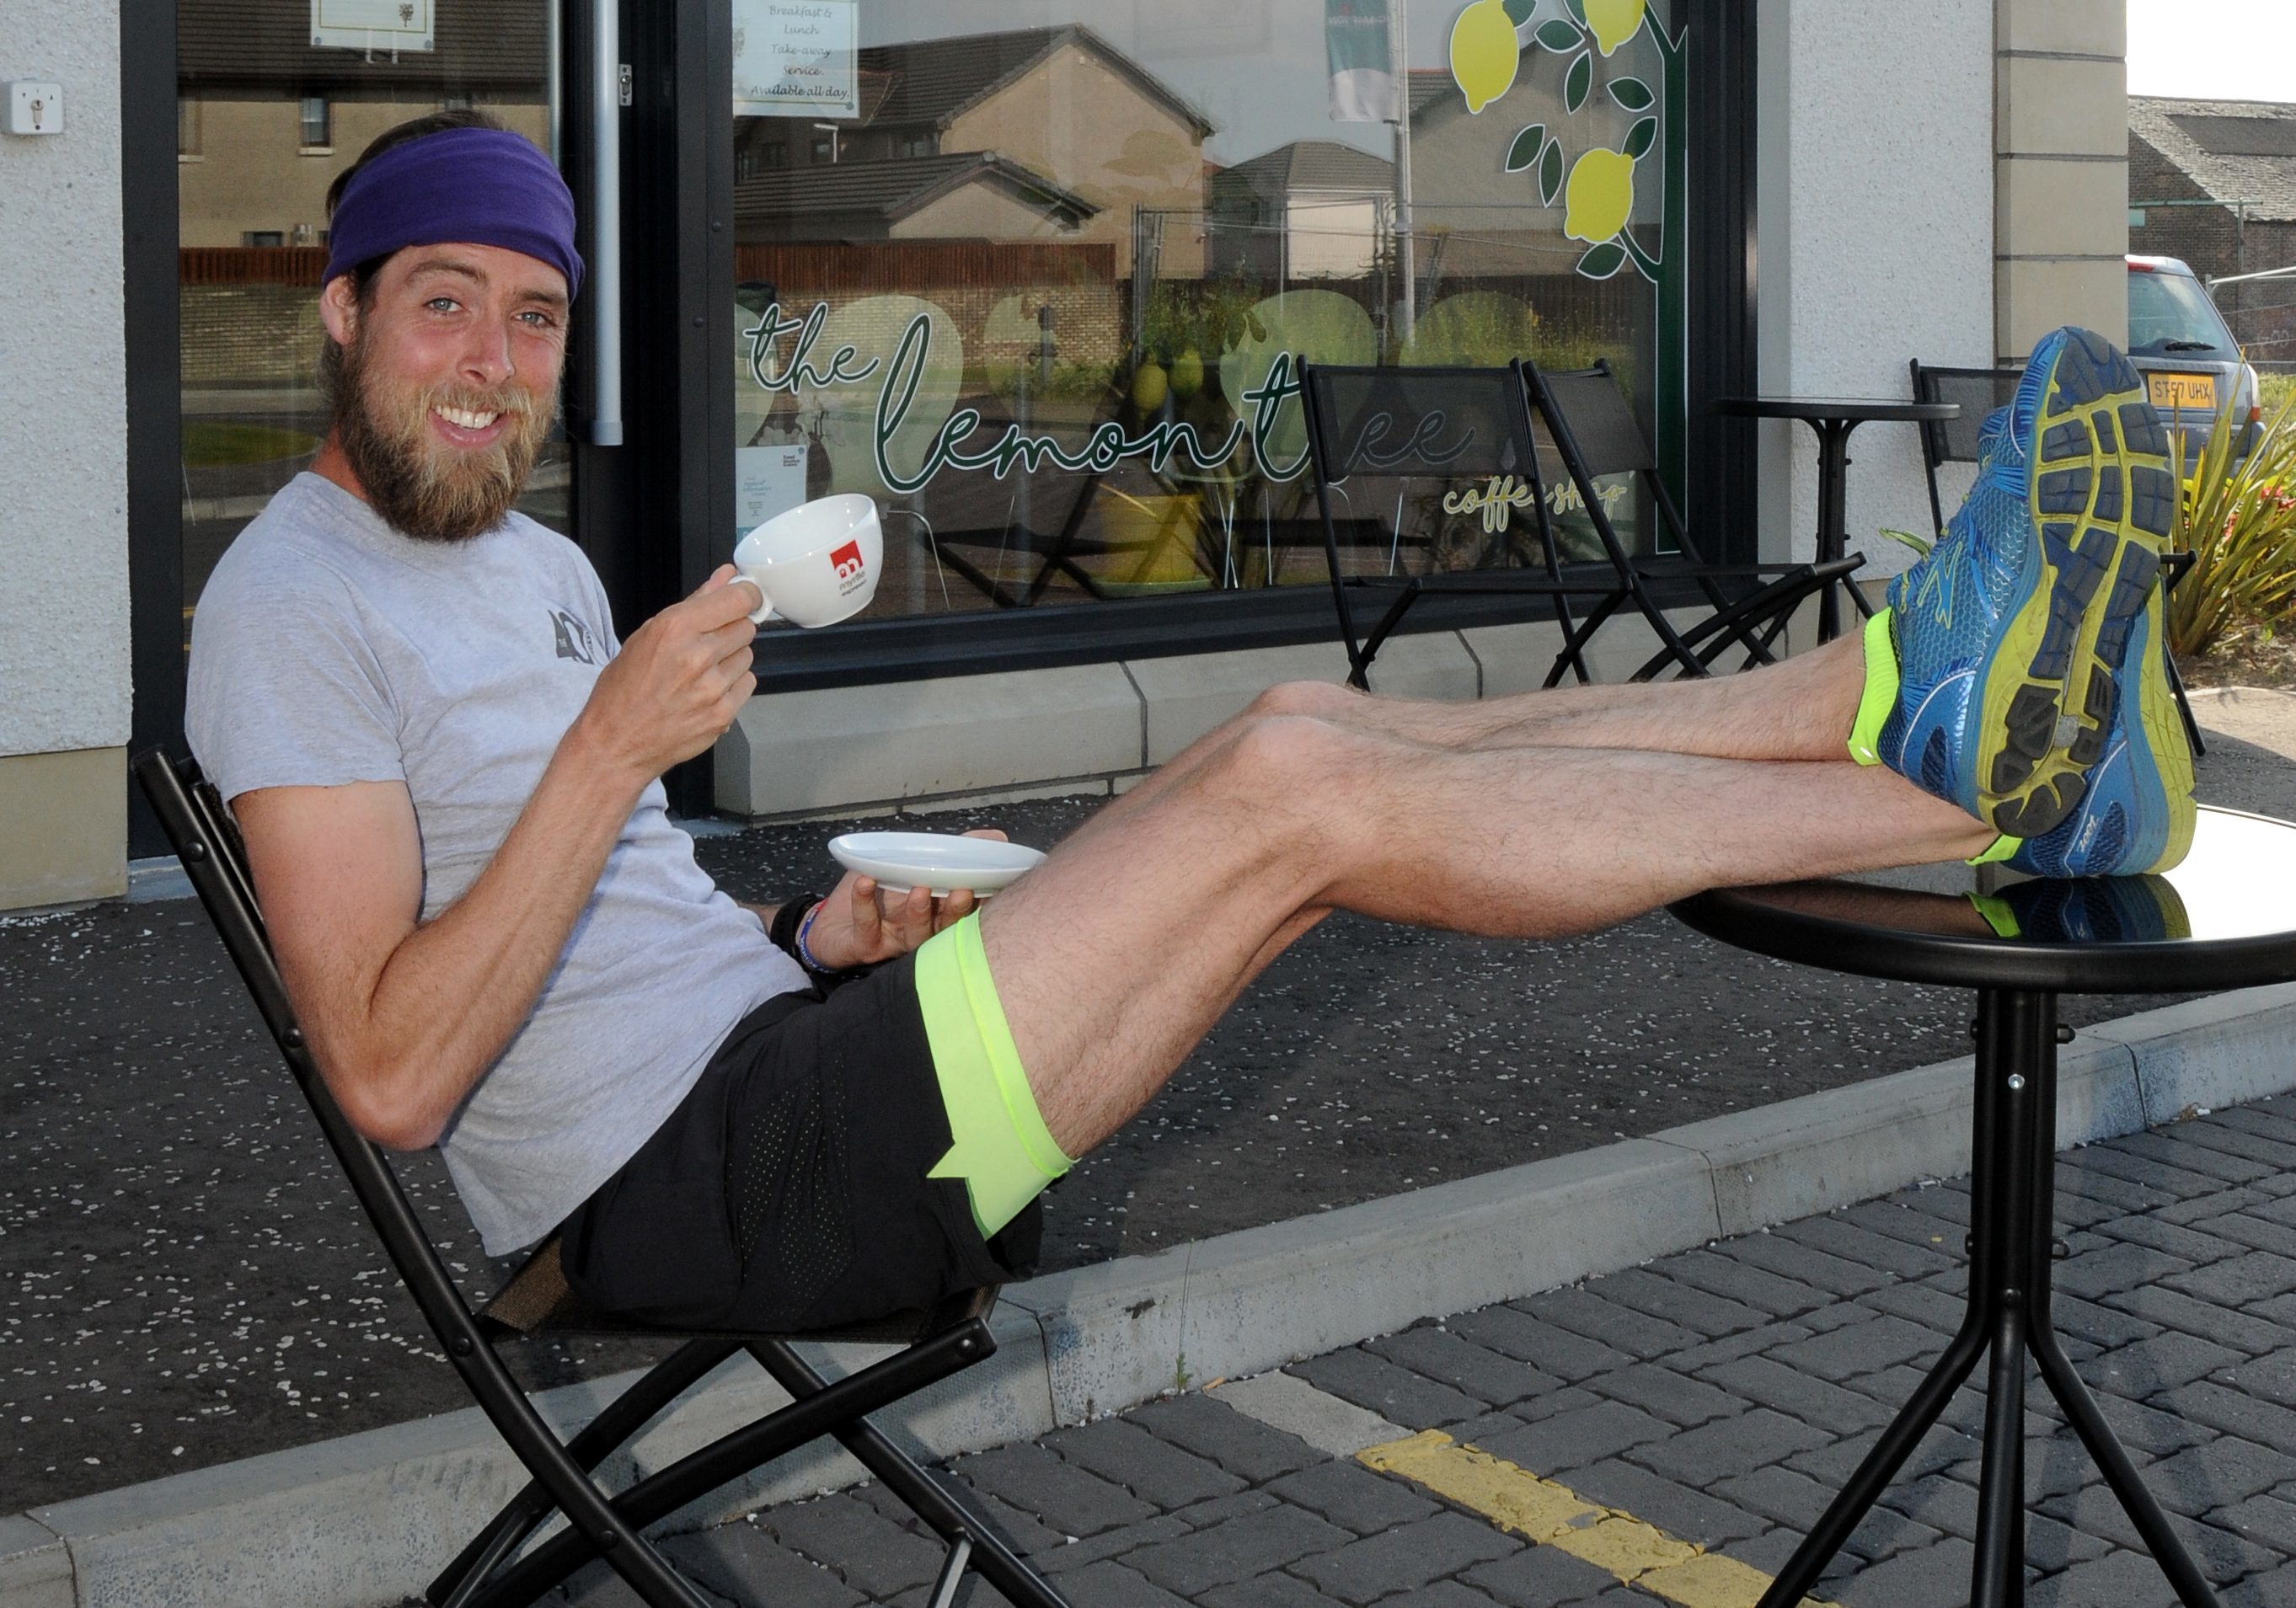 Ben Smith enjoys a pit stop in Leven as he runs 401 marathons in 401 days.